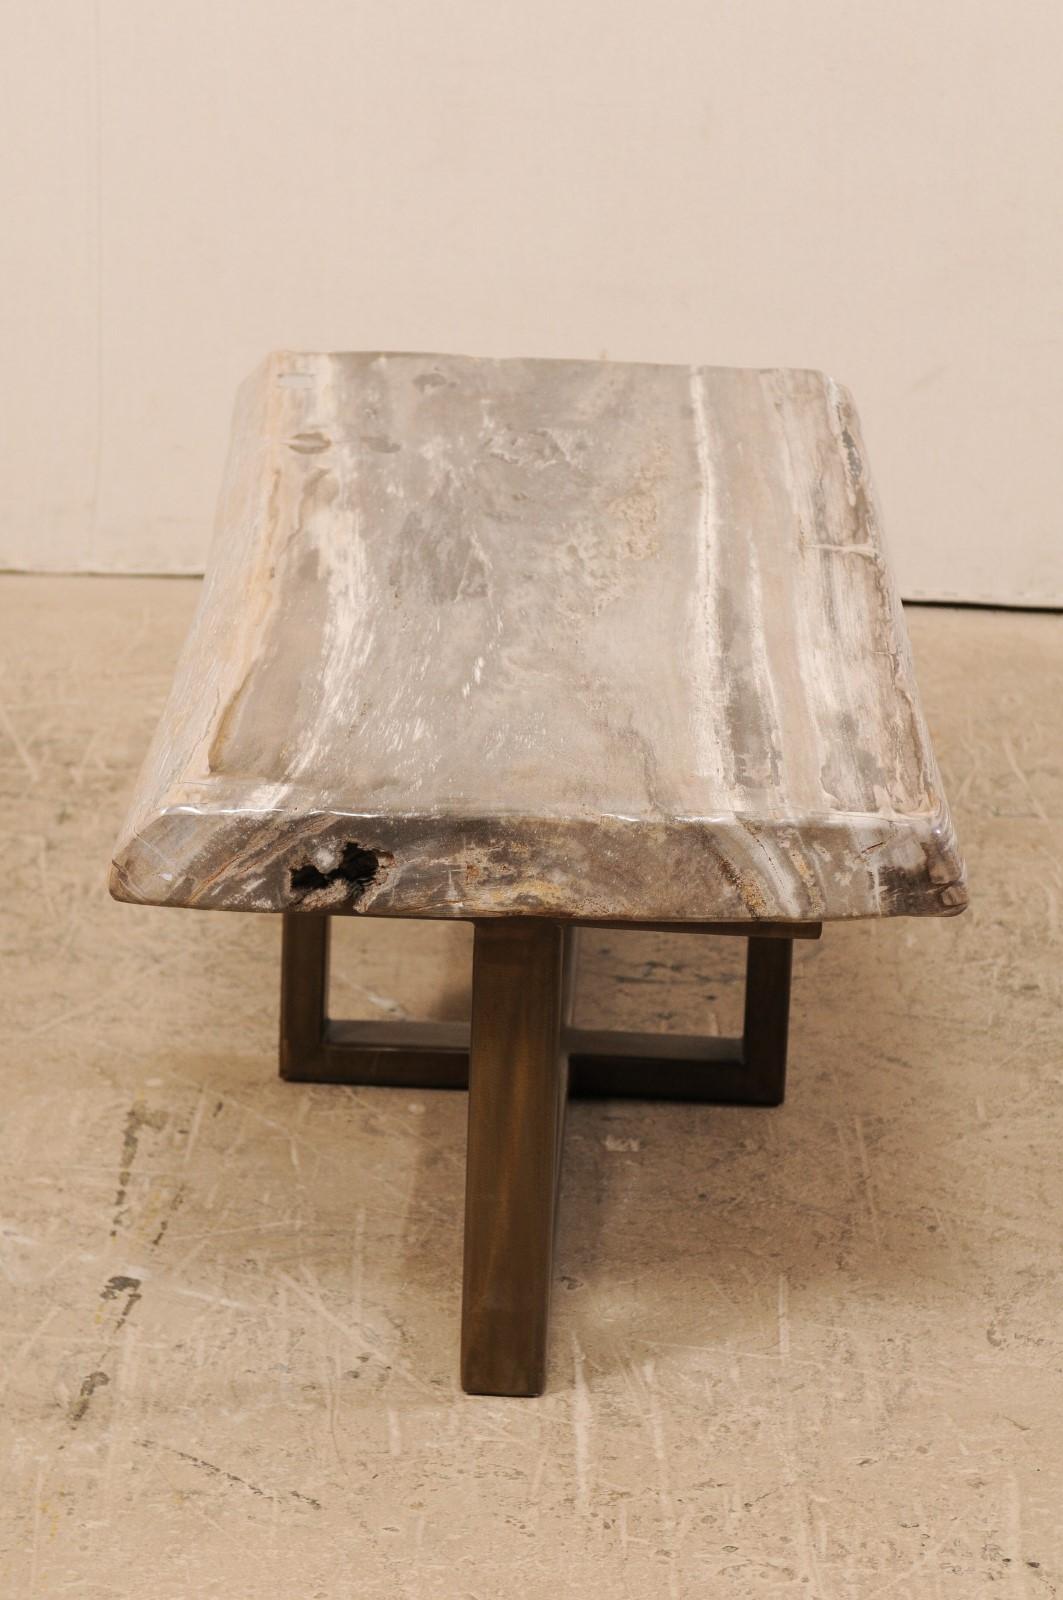 Polished Petrified Wood Coffee Table or Bench with Modern Metal Base 4